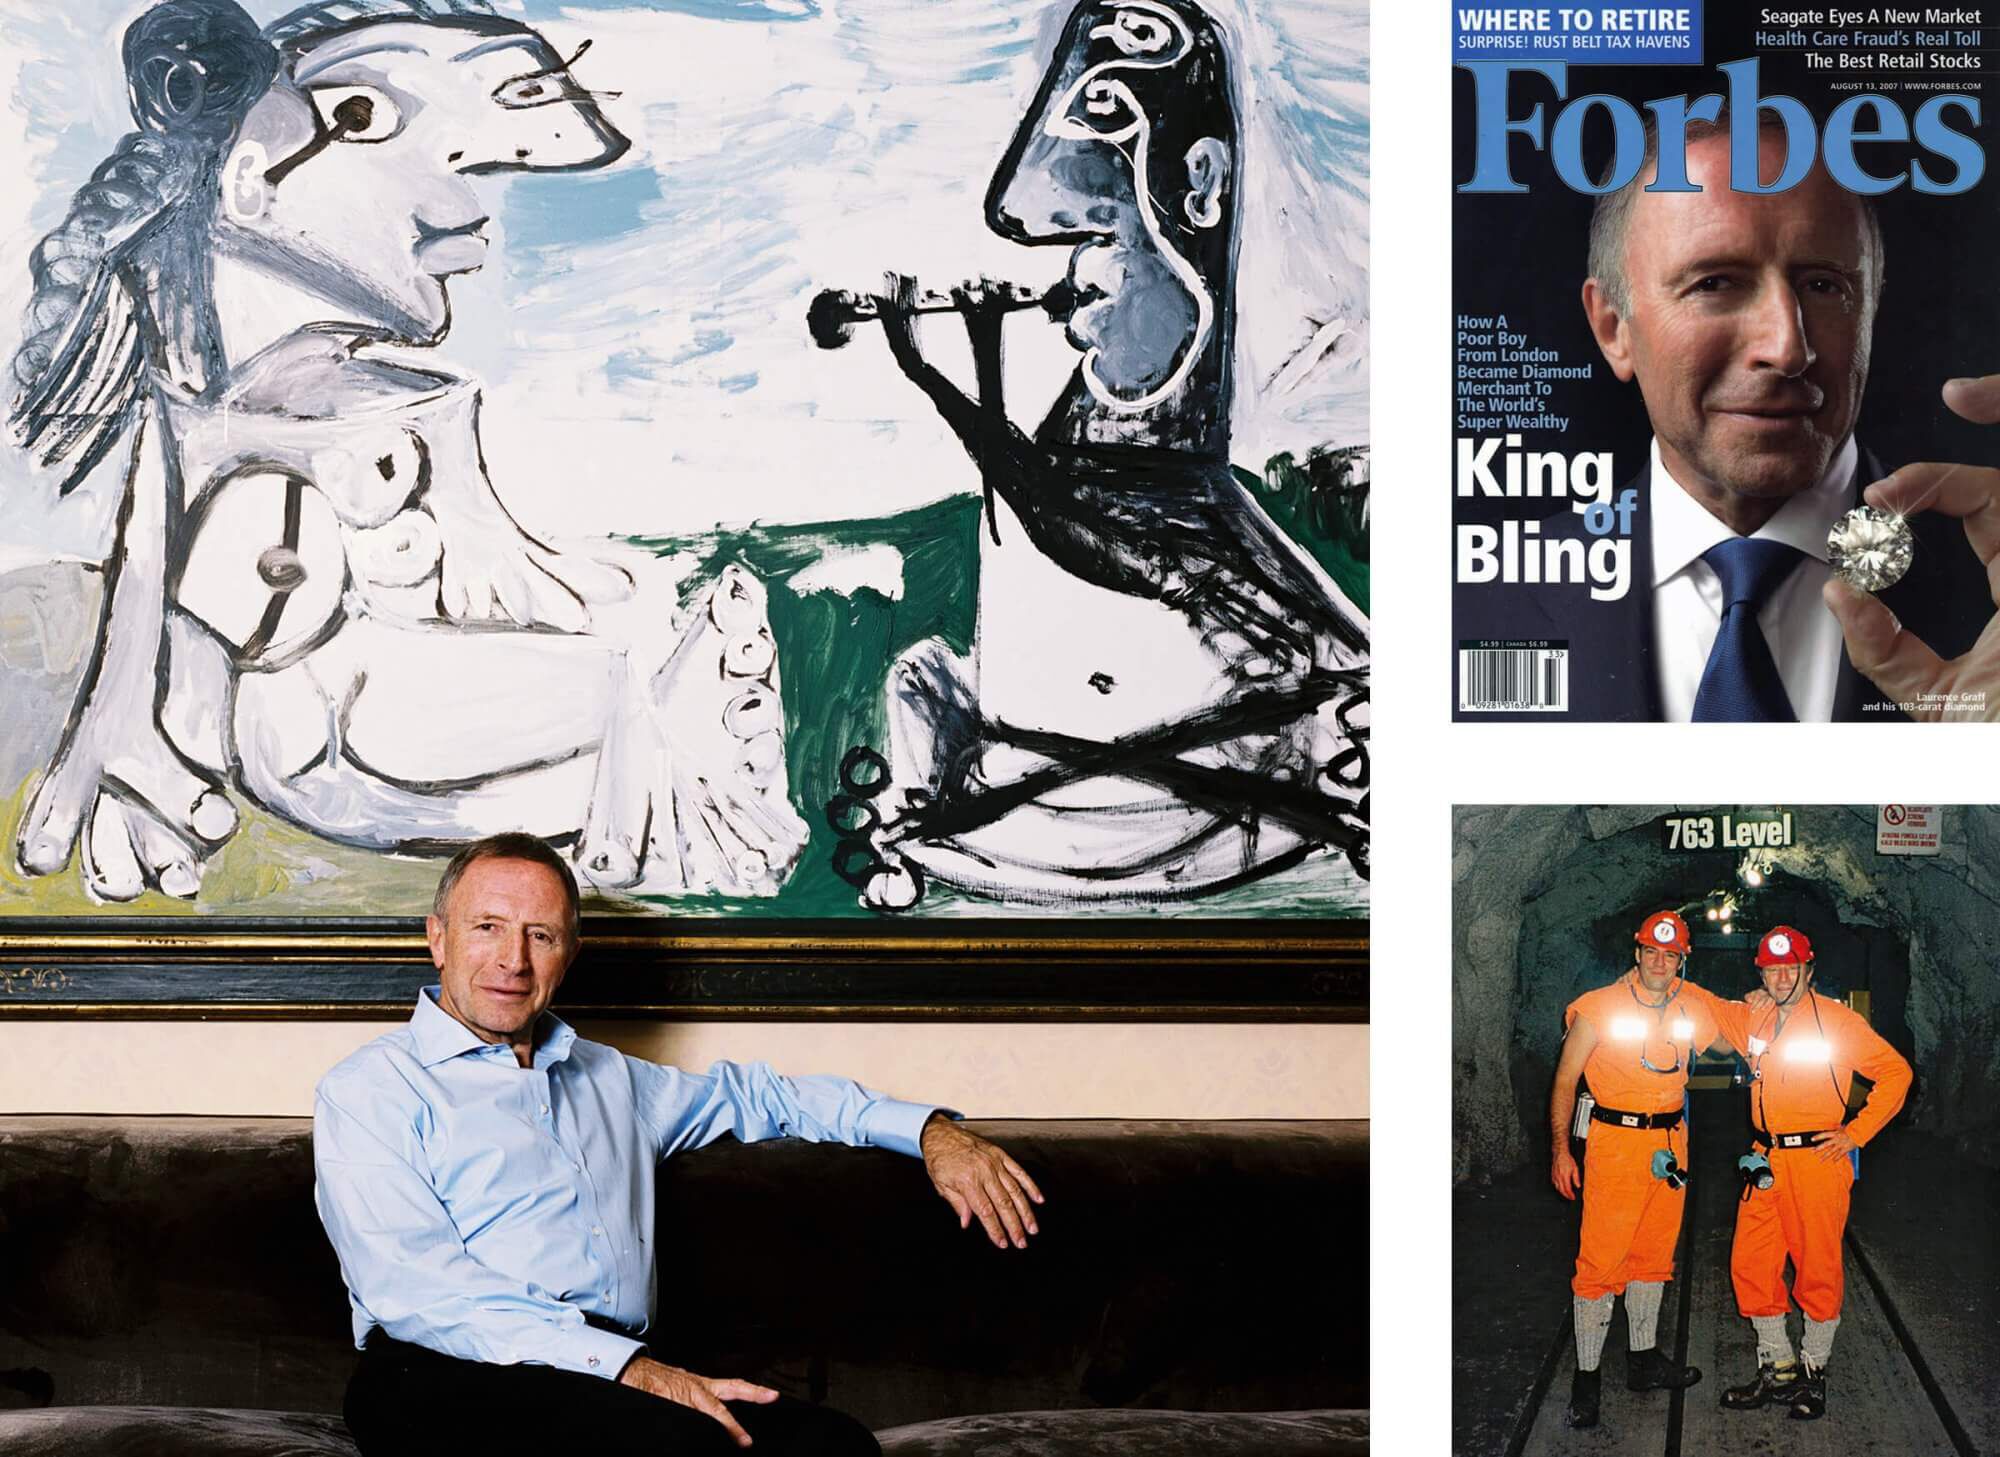 images of Mr Laurence Graff OBE sitting on a sofa, on the Forbes cover and in a mine with his son Mr Francois Graff  